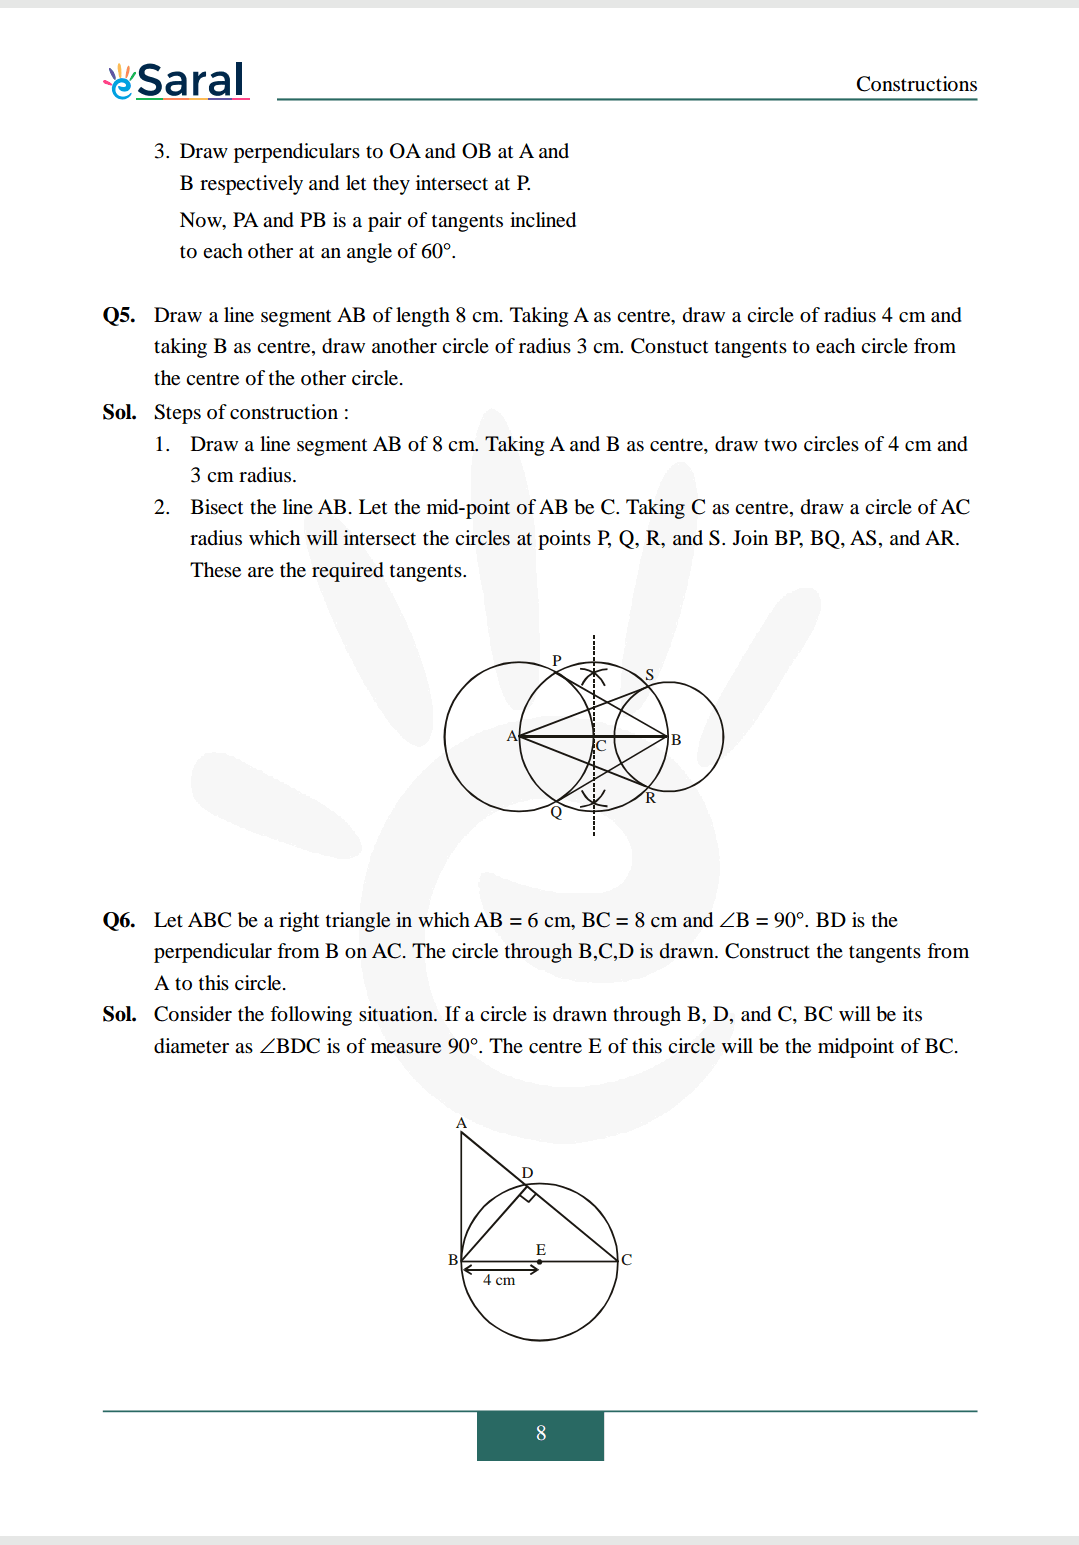 Class 10 Maths Chapter 11 exercise 11.2 solutions Image 3